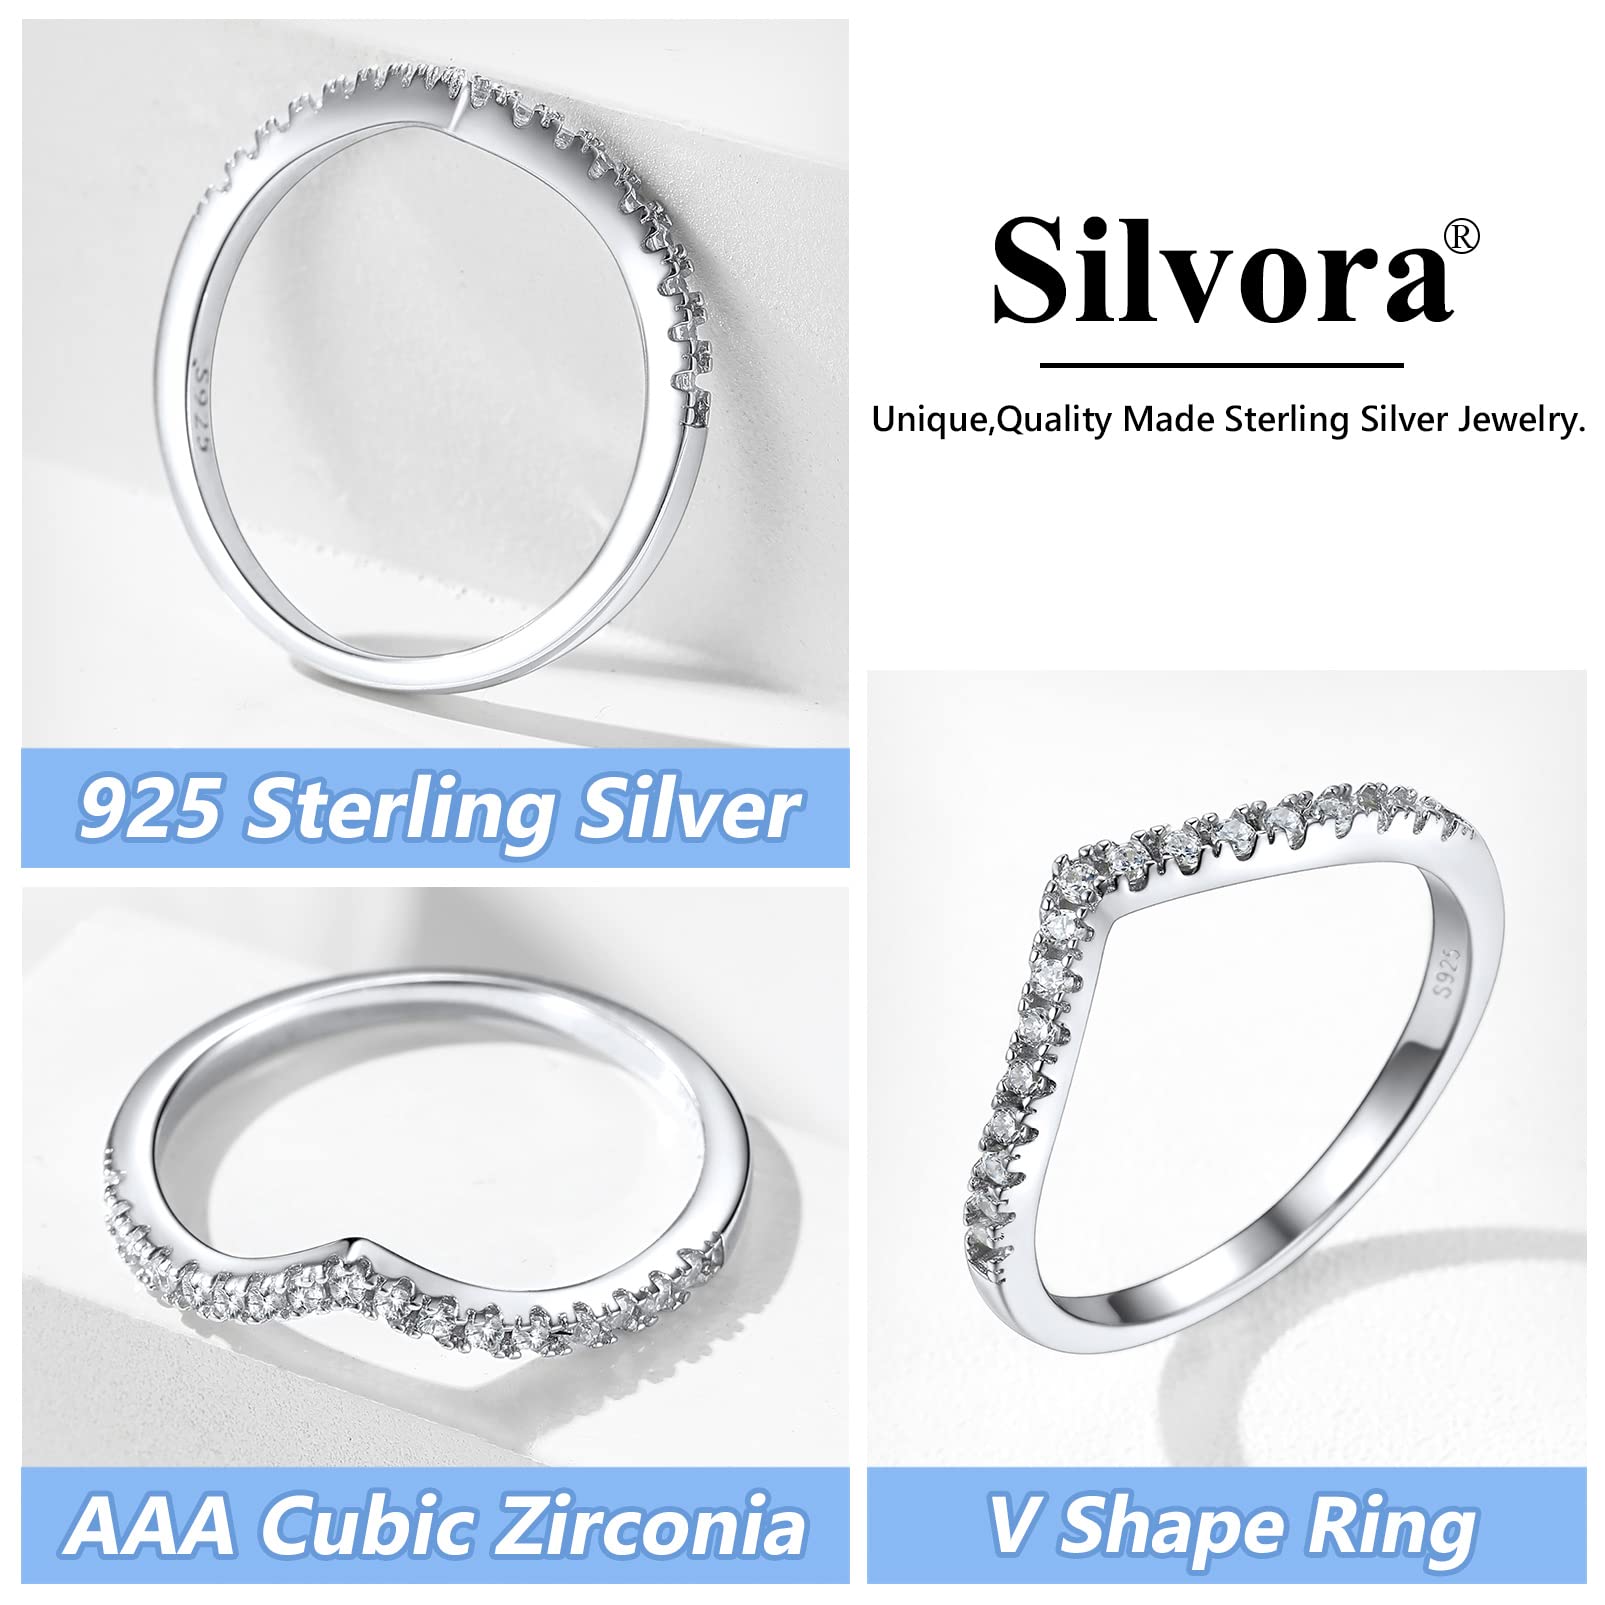 Silvora Sterling Silver Stacking Wishbone Rings for Women Teen Girls, Wedding Band Jewelry with Delicate Gift Packaging, Customizable